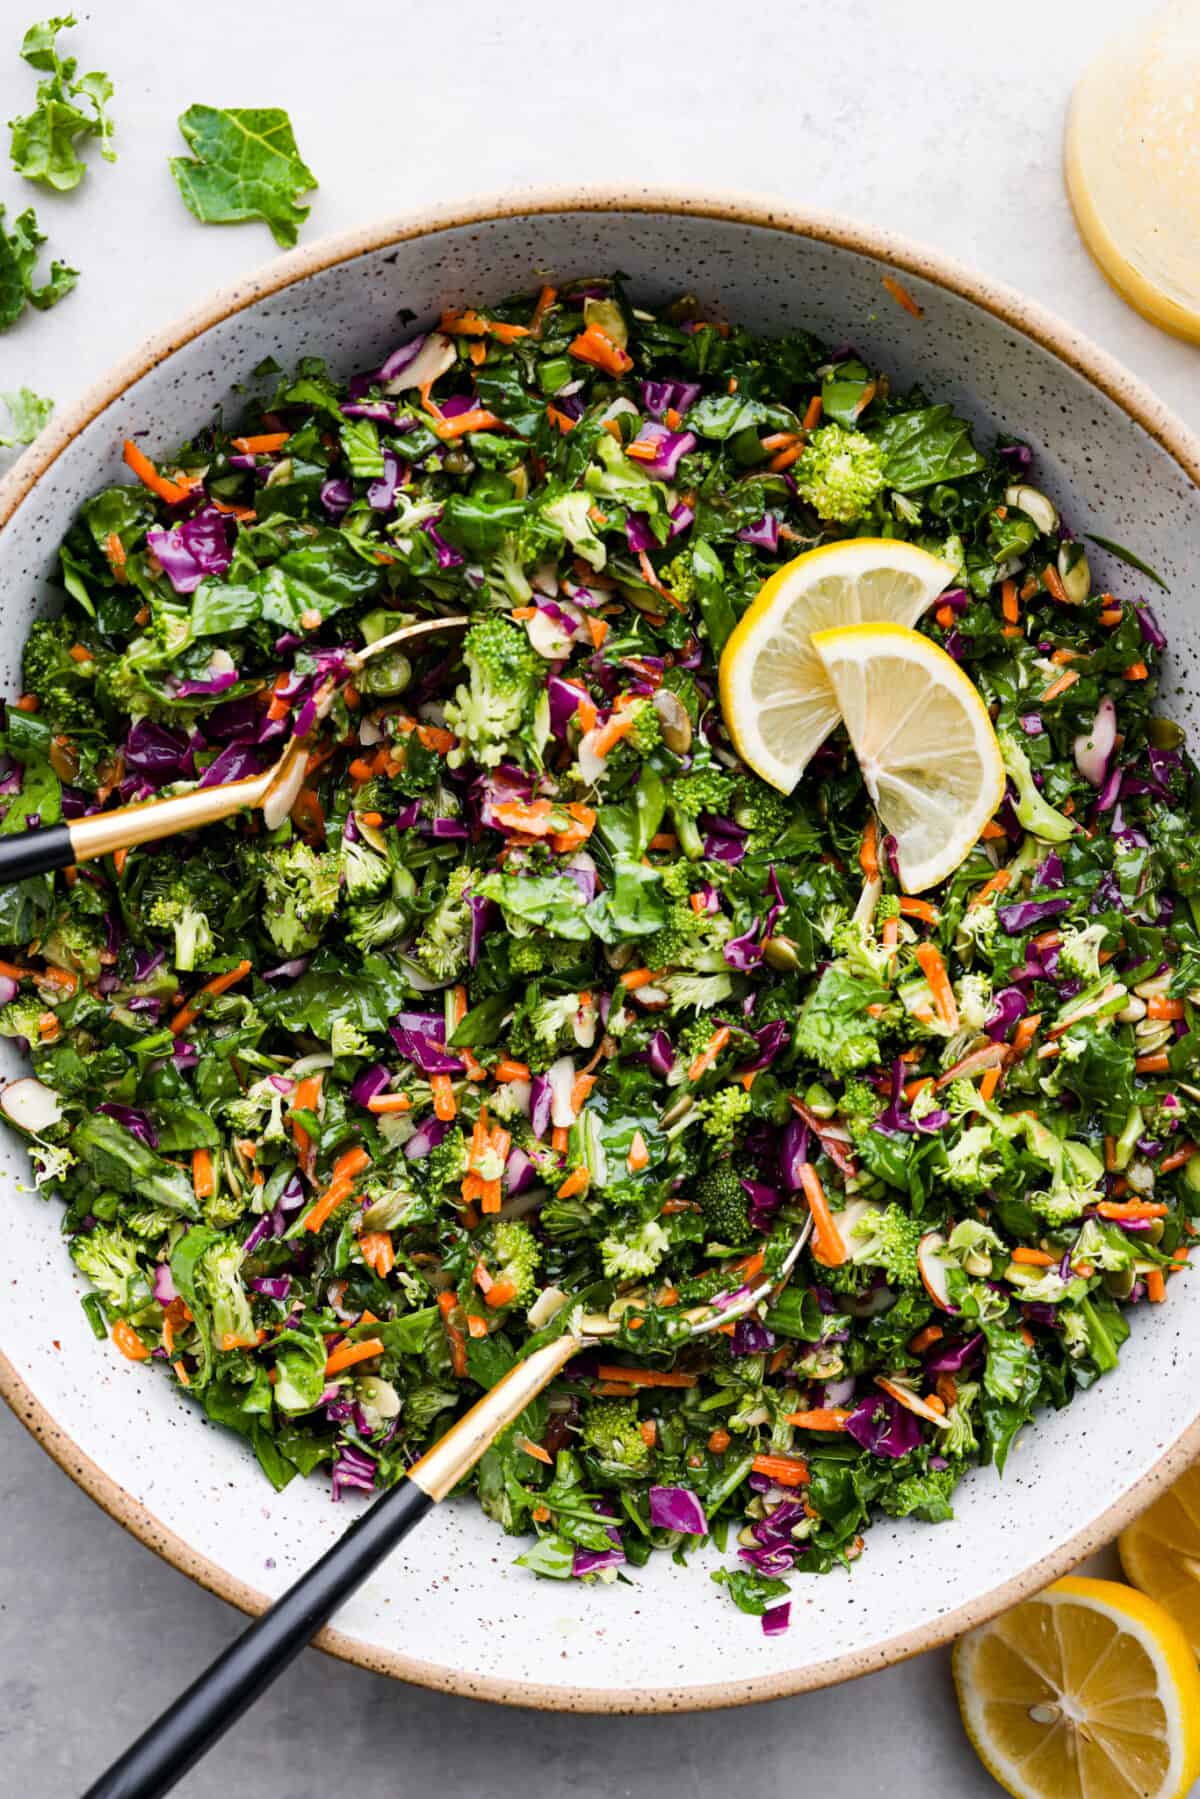 Overhead view of detox salad in a large bowl with a serving spoon.